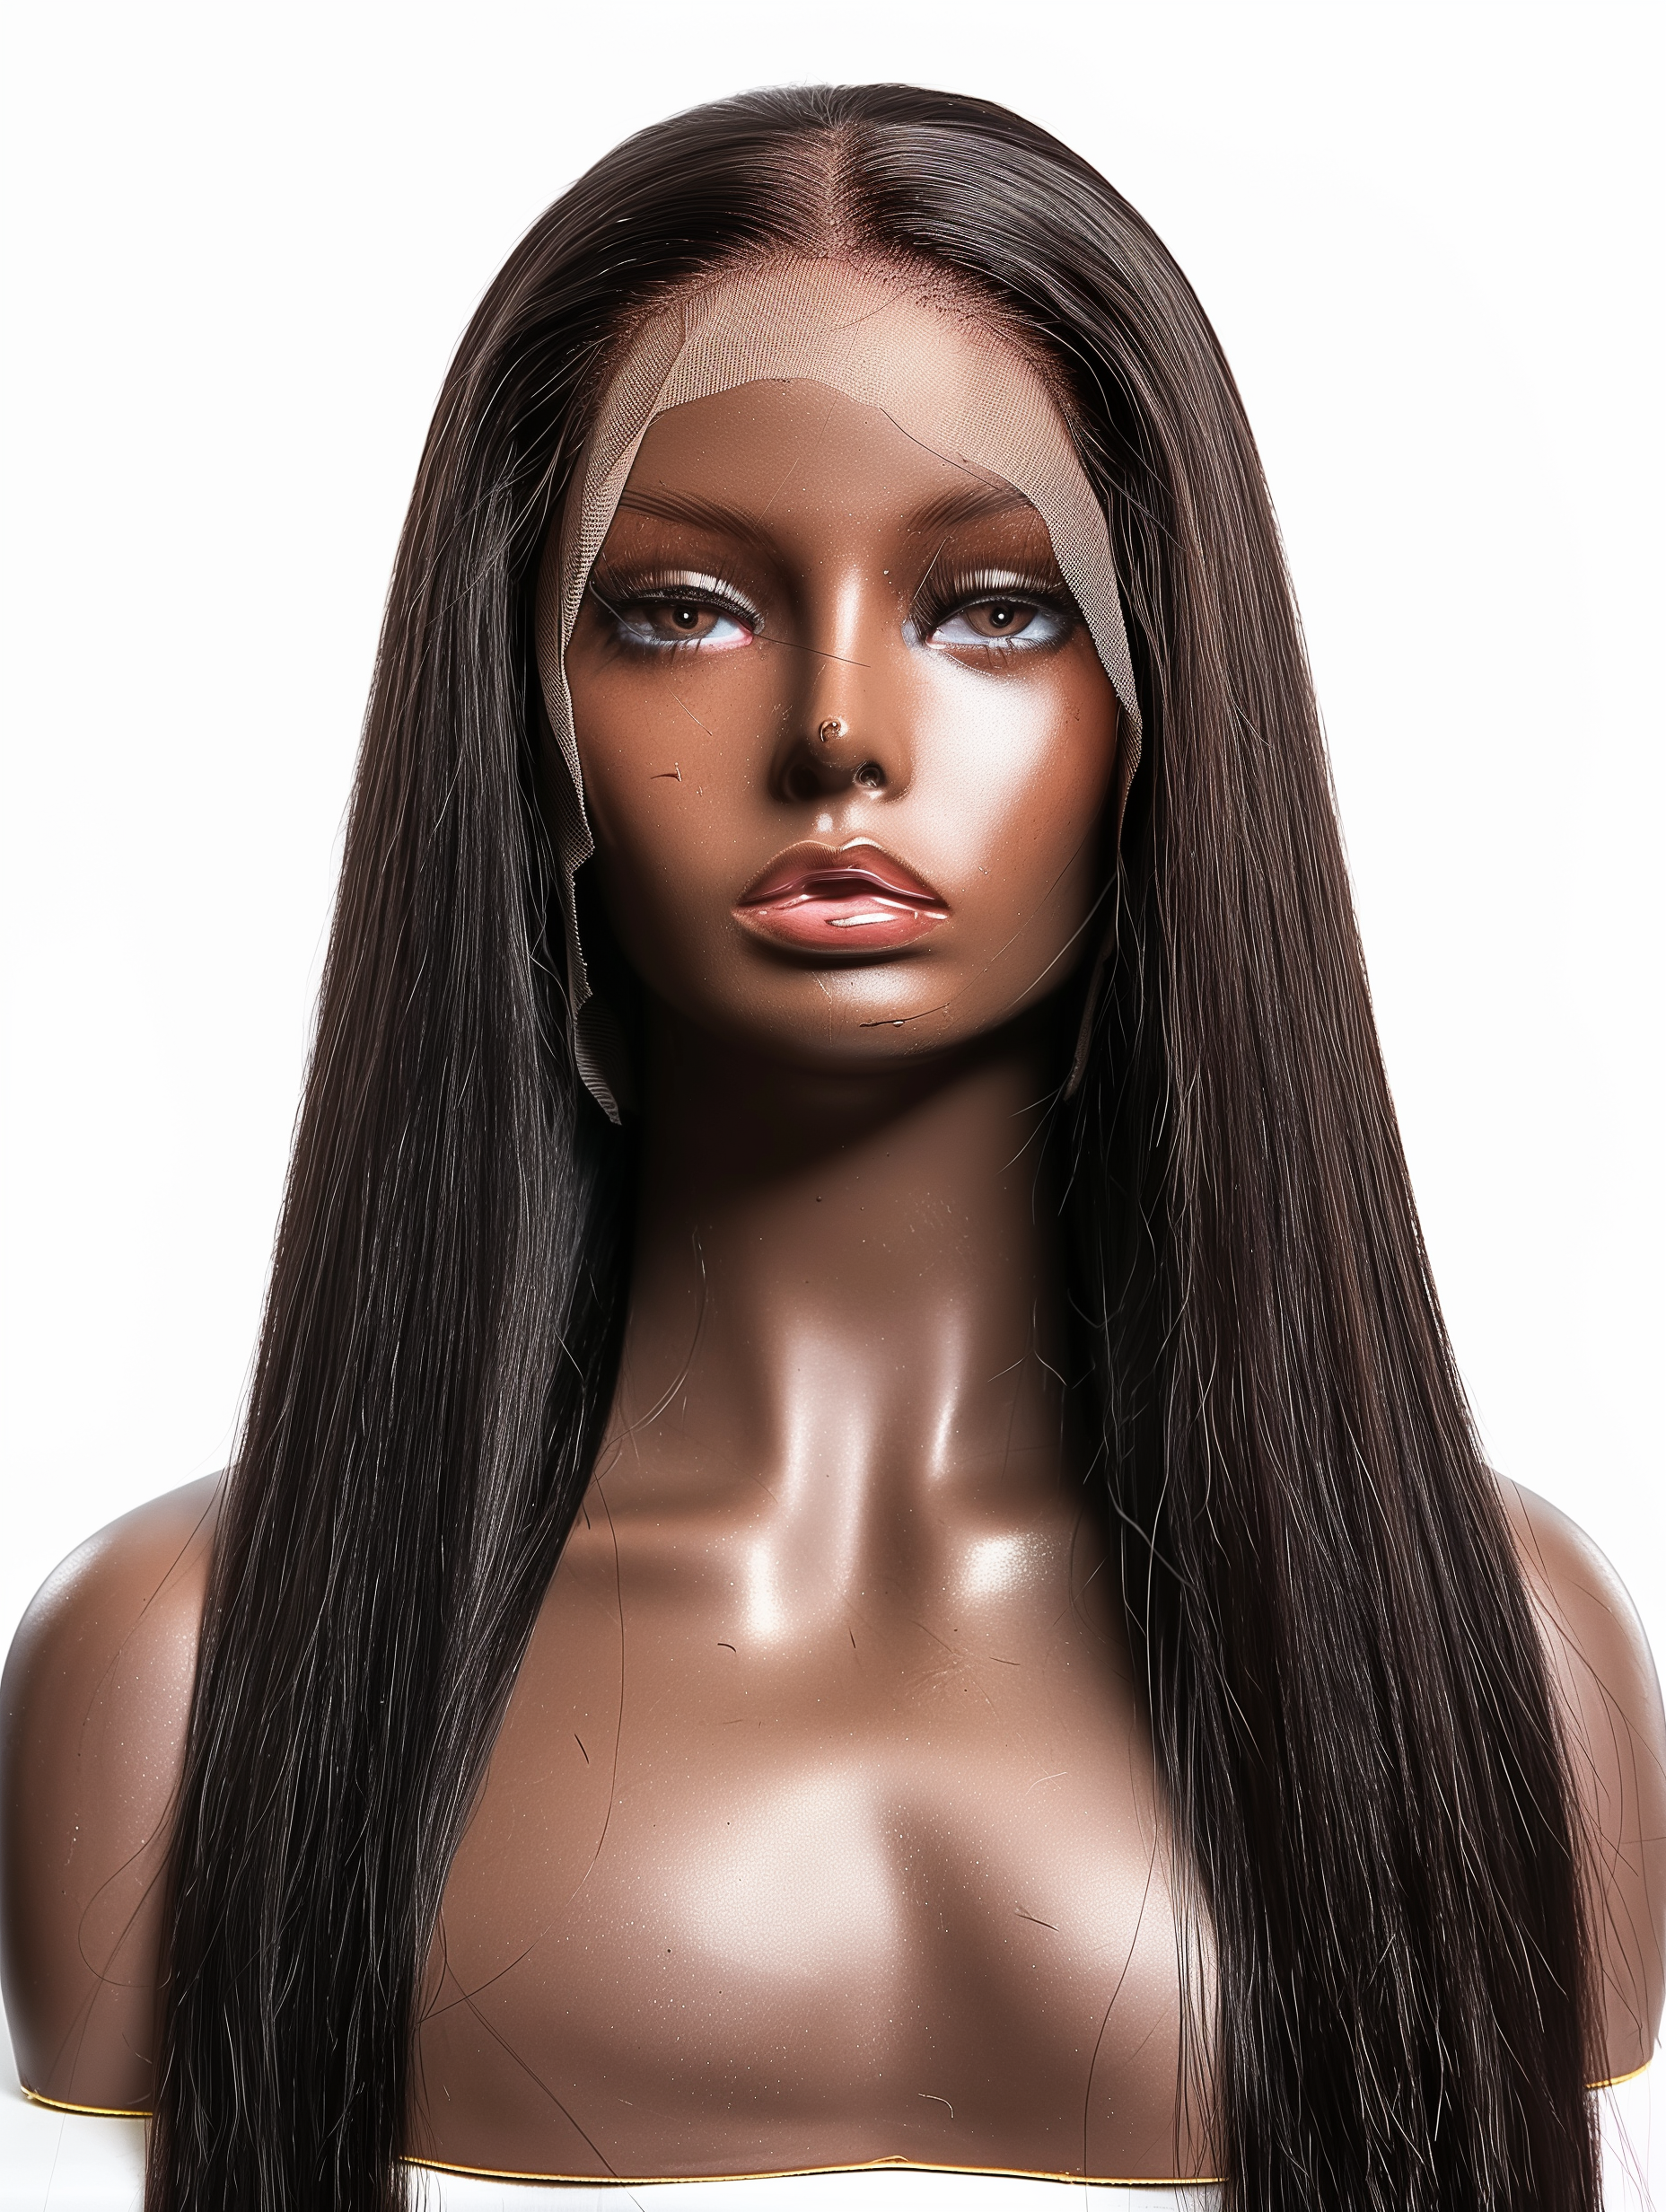 EtrnlHair Elegance Series: HD Lace Front Human Hair Wigs, Straight Texture, 13x4 & 13x6 Transparent Swiss Lace Frontal, Pre-Plucked HD Lace Wigs for Women